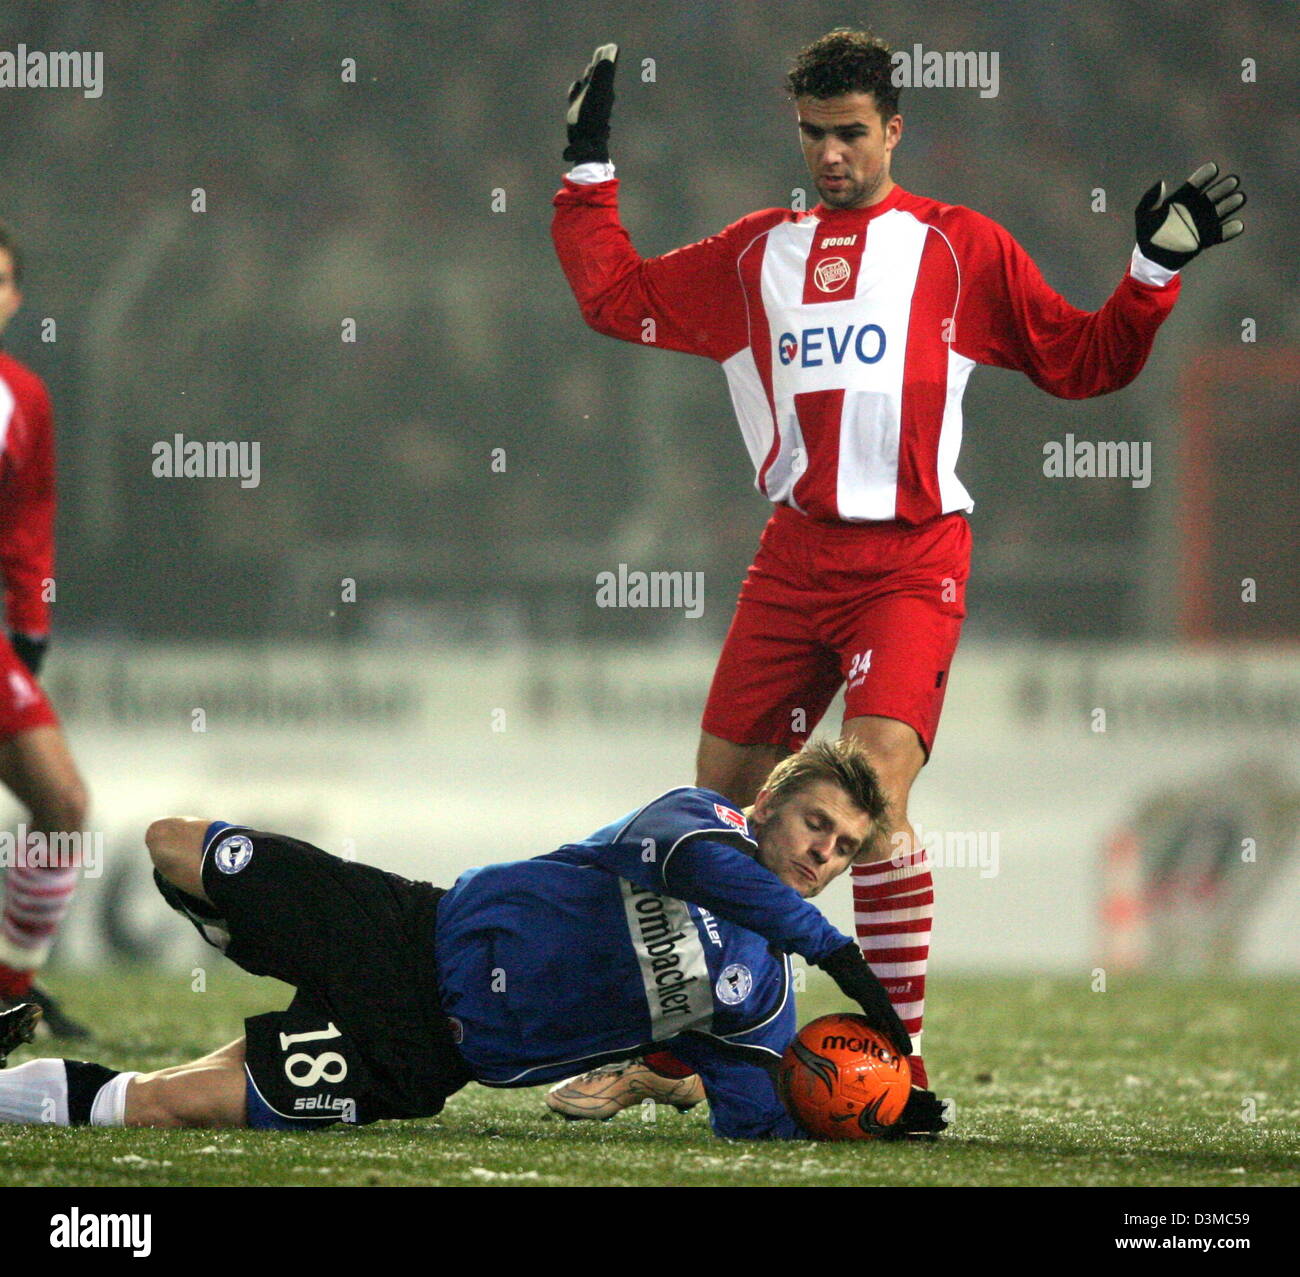 Arminia Bielefeld's Artur Wichniarek stops the ball like a goalkeeper in a duel with Kickers Offenbach's Matej Milijatovic (R) during the German Cup quarter-finals soccer match at the Schueco Arena stadium in Bielefeld, Germany, Wednesday 25 January 2006. Around12,000 spectators watched Bielefeld advance to the semi-finals after a penalty shoot-out. Photo: Franz-Peter Tschauner Stock Photo